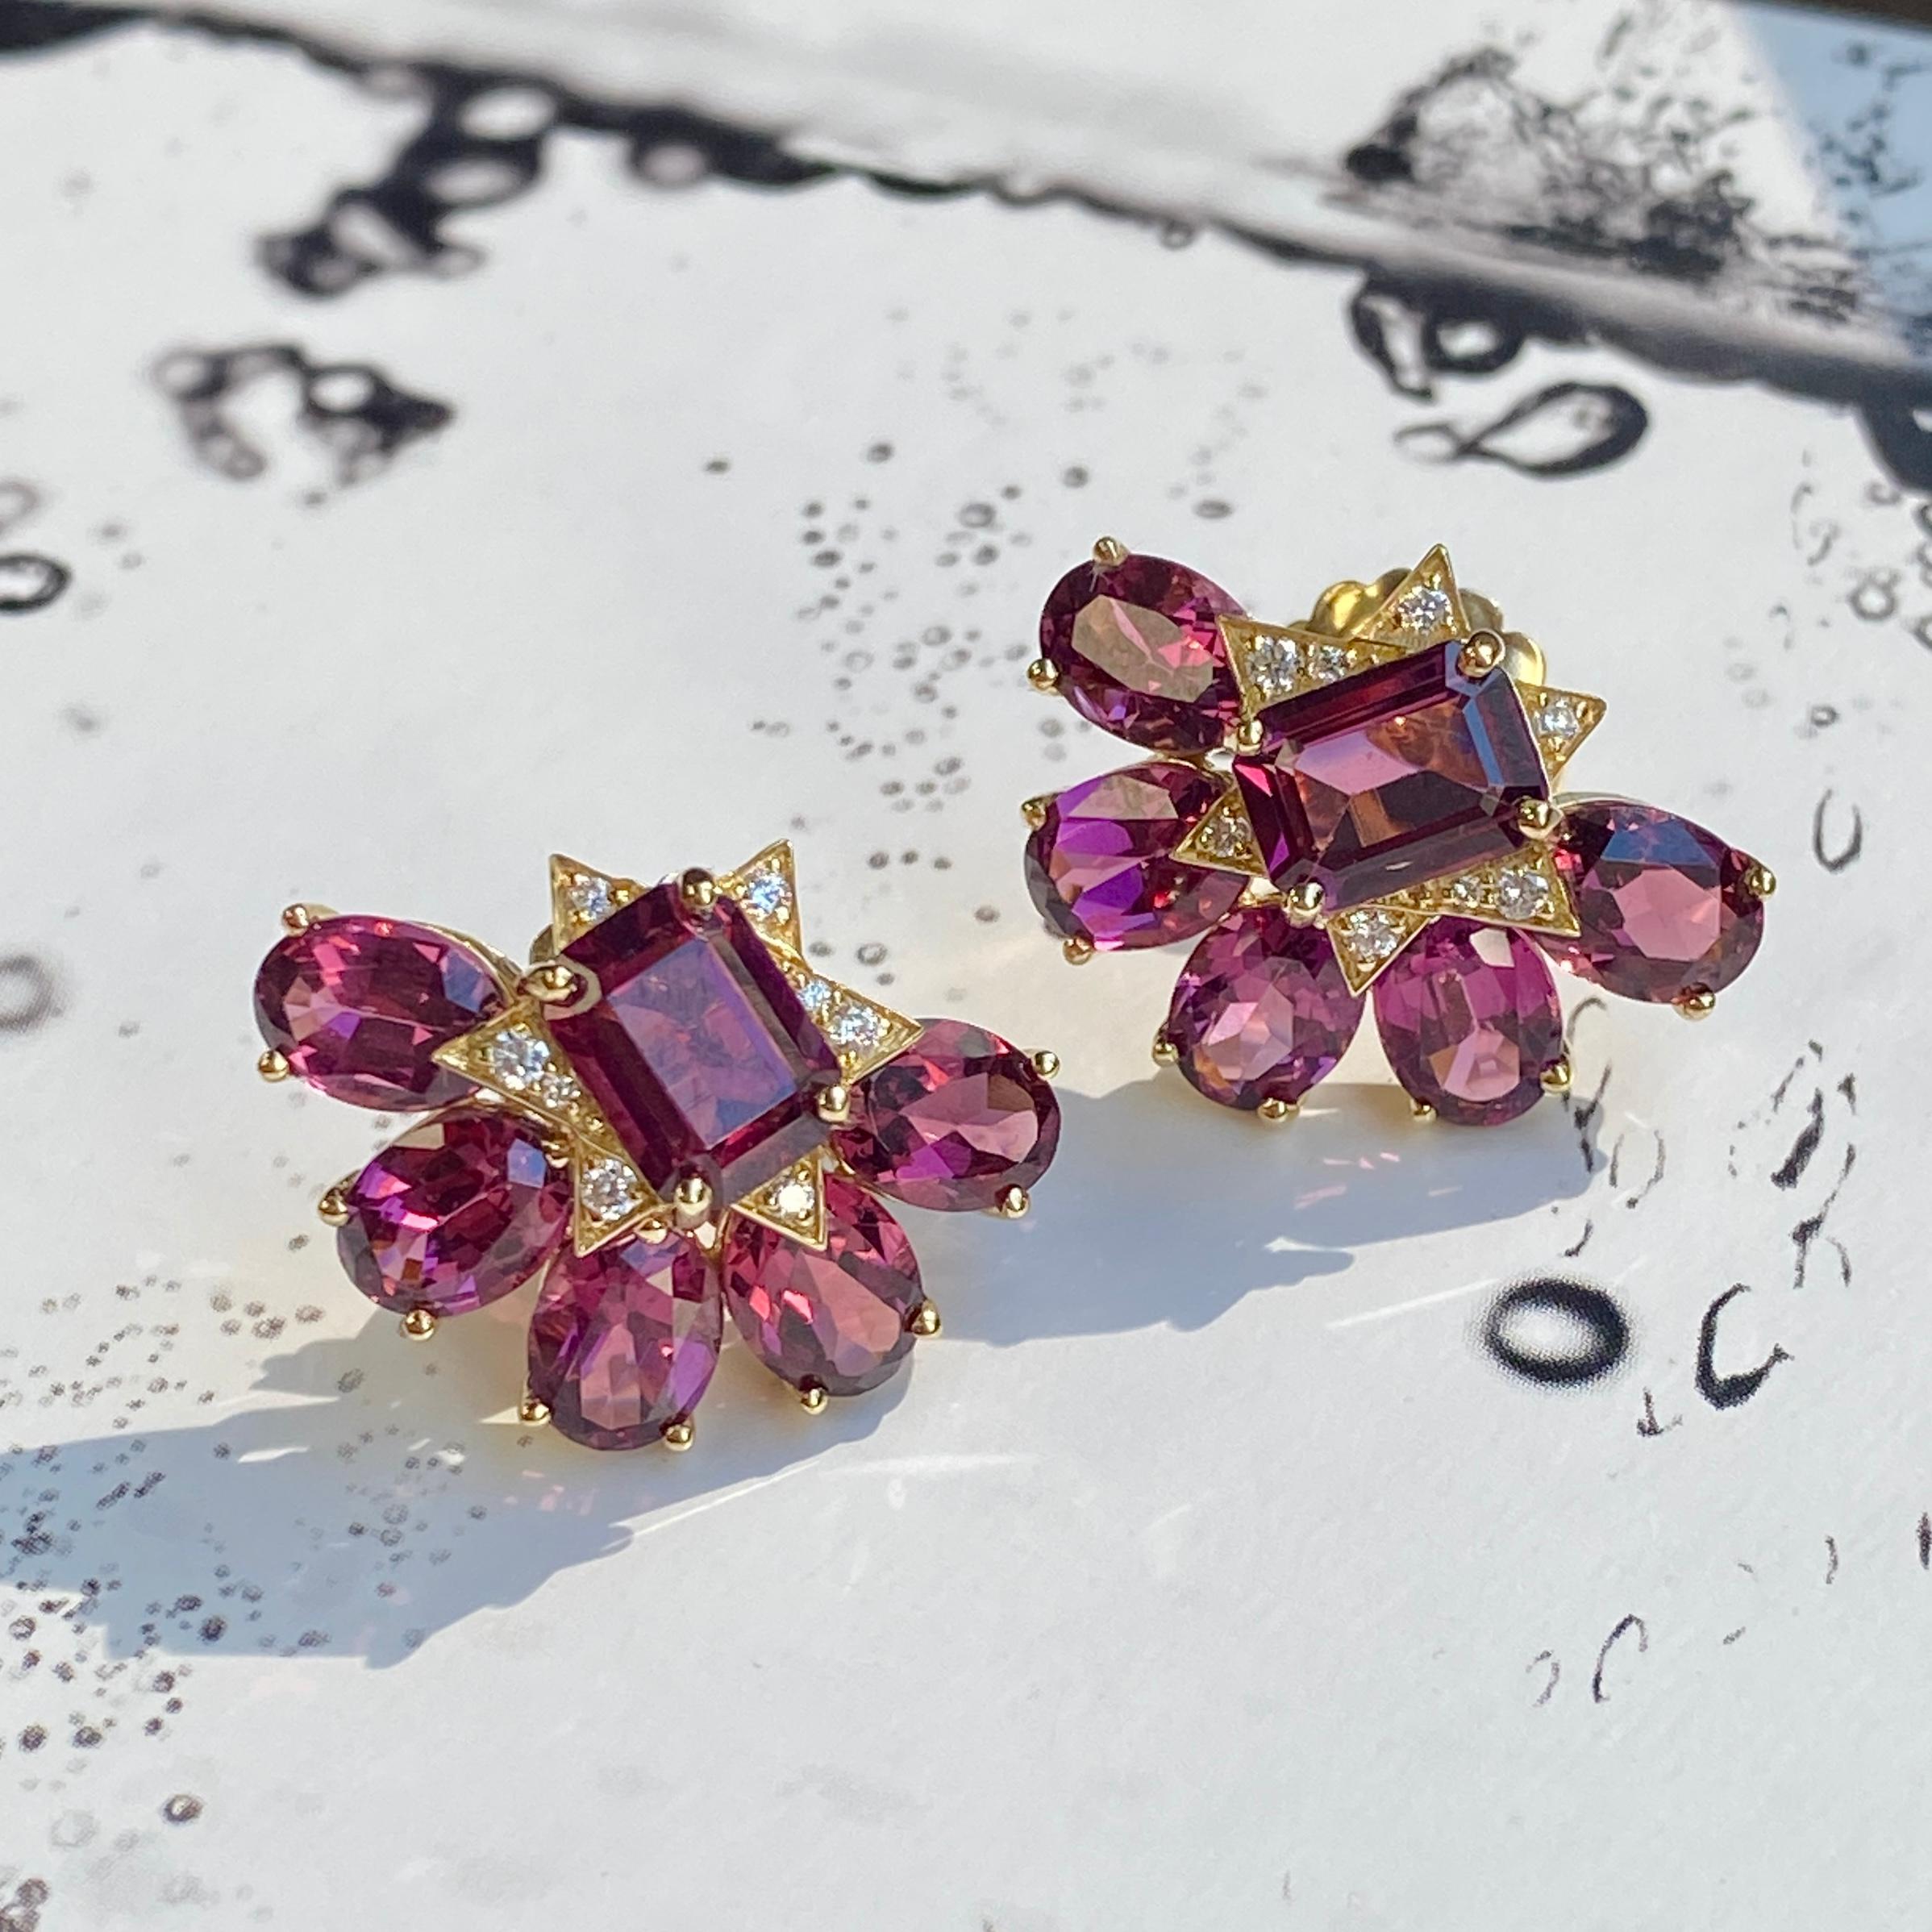 Faceted Oval and Emerald Cut Garnet Stud Earrings with Diamonds in 18K Yellow Gold, from 'G-One' Collection

Approx. Stone Wt: 12.96 Carats (Garnet)

Diamonds: G-H / VS, Approx. Wt:  0.14 Carats